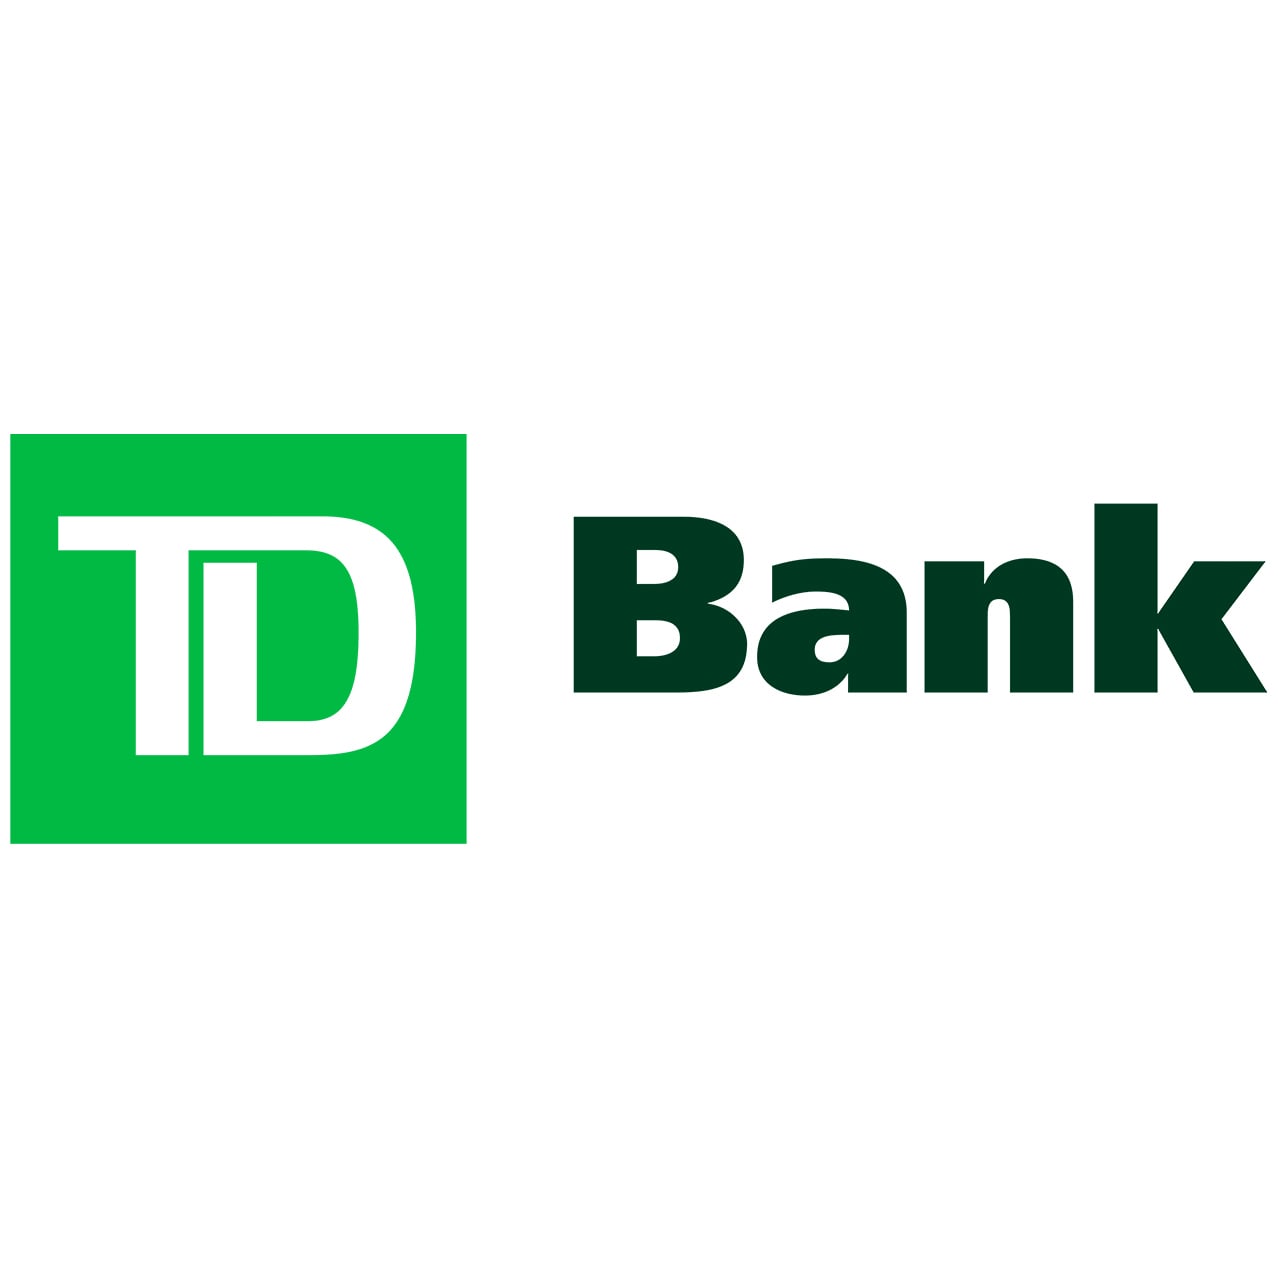 TD Convenience Checking